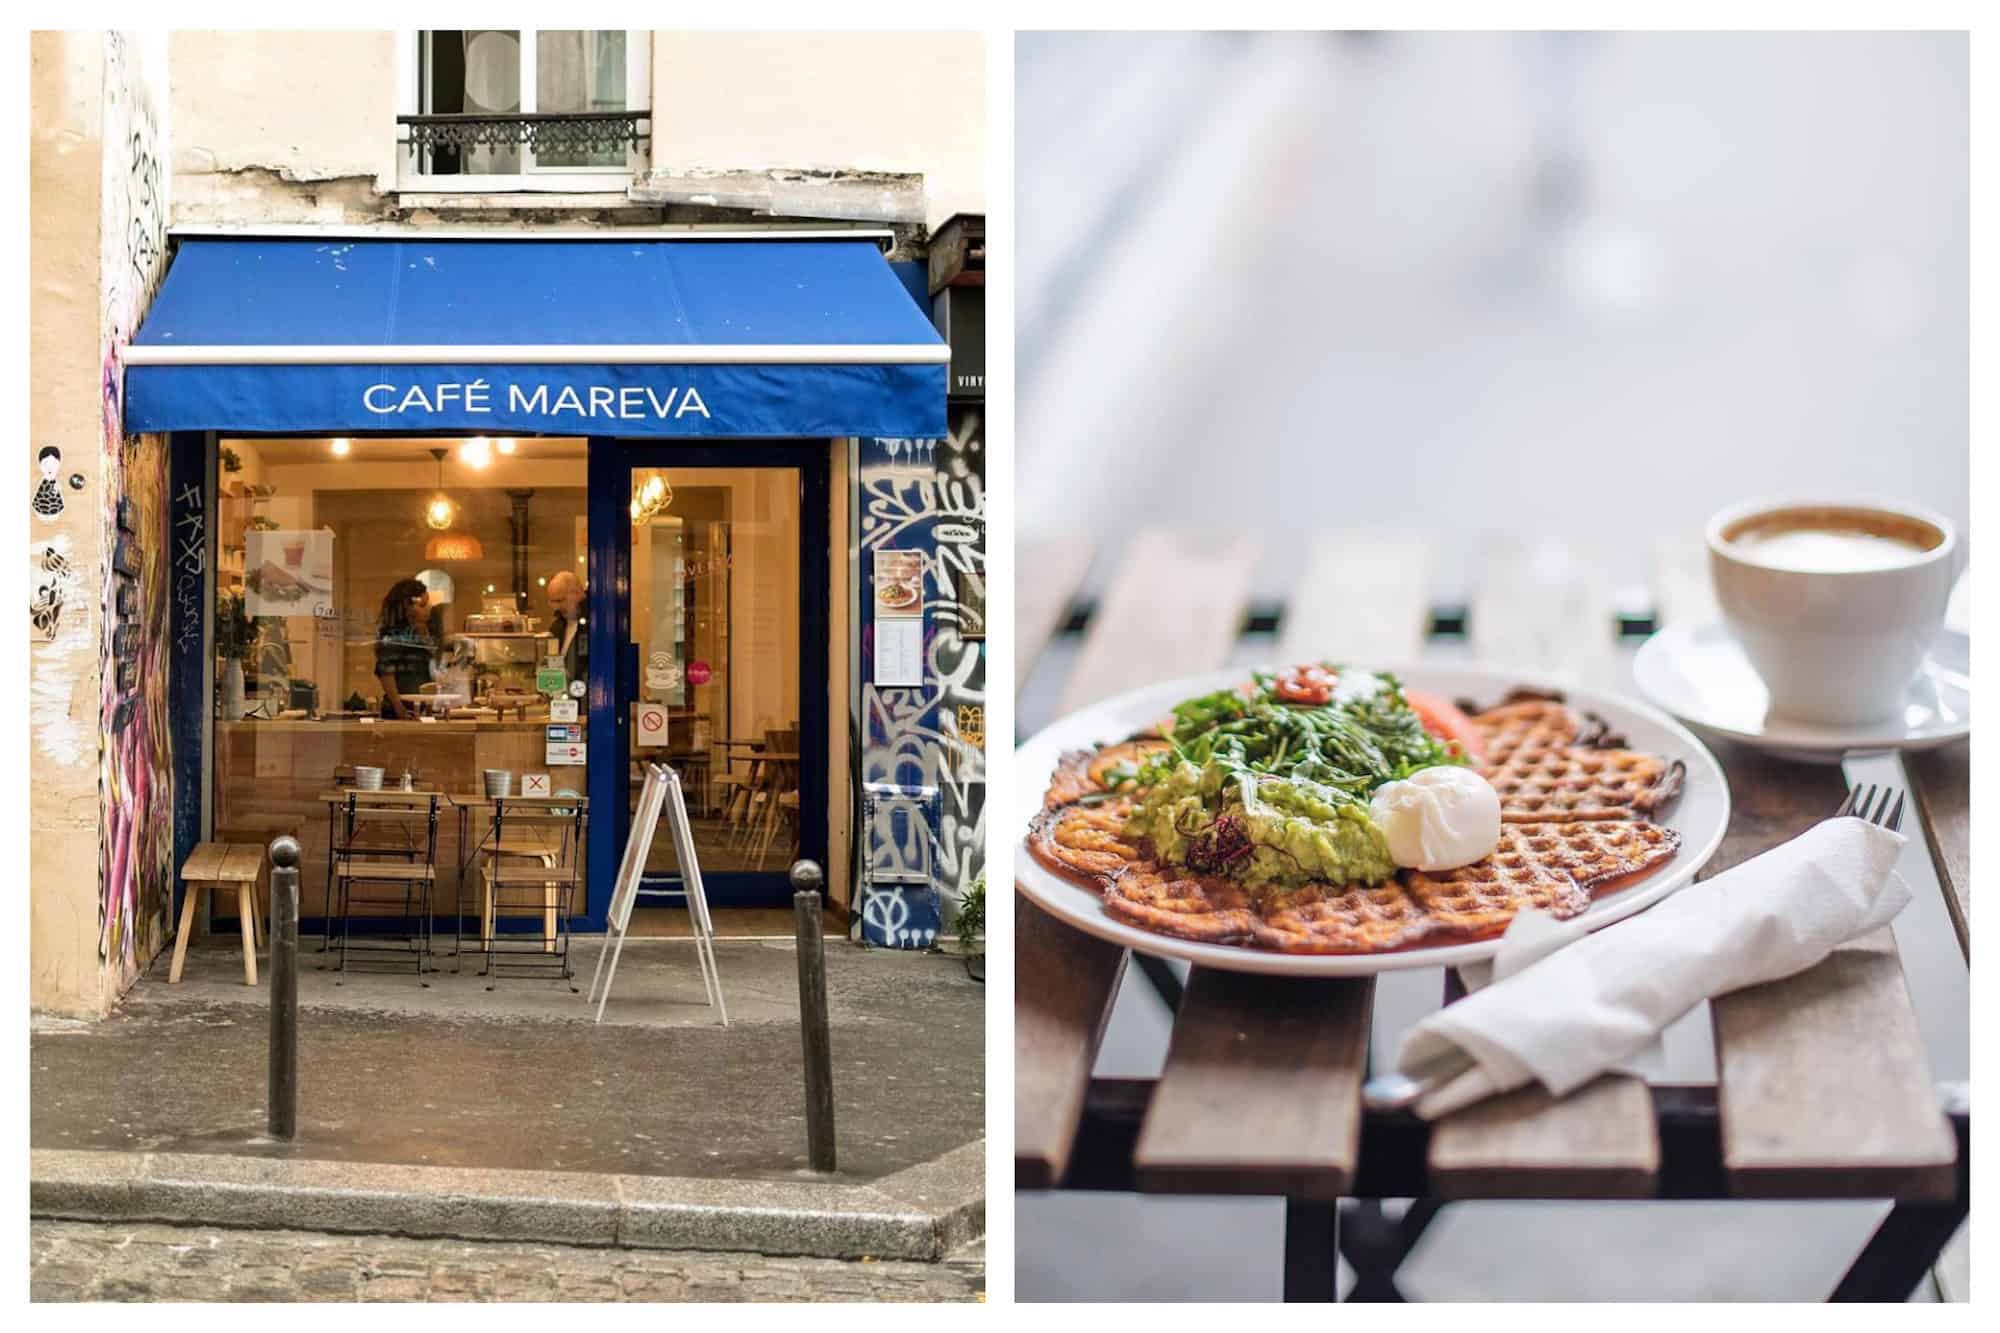 Outside best gluten-free coffee shop in Paris, Mareva with its blue awning (left) and it's tasty gluten-free waffles with avocado and poached eggs (right).